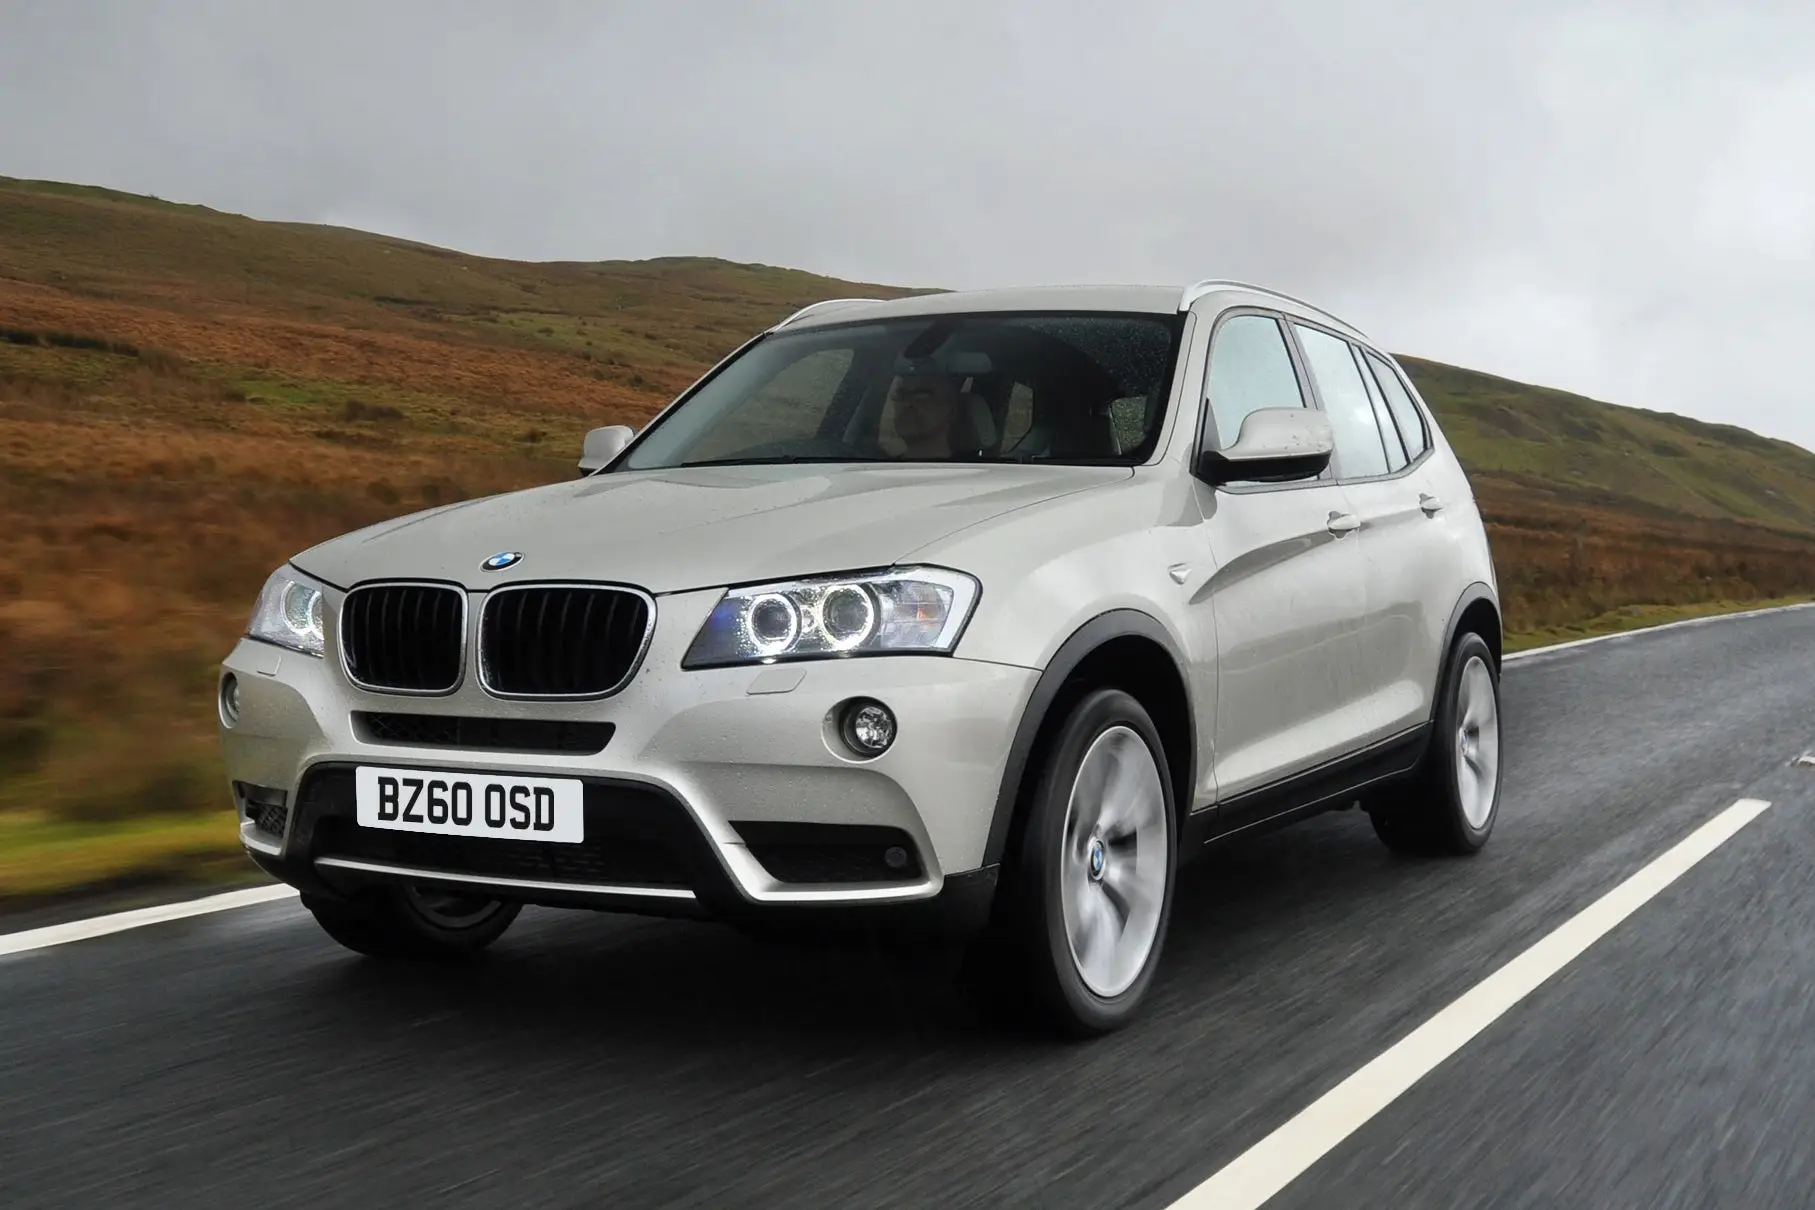 BMW X3 (2010-2018) Review: Exterior front three quarter photo of the BMW X3 on the road